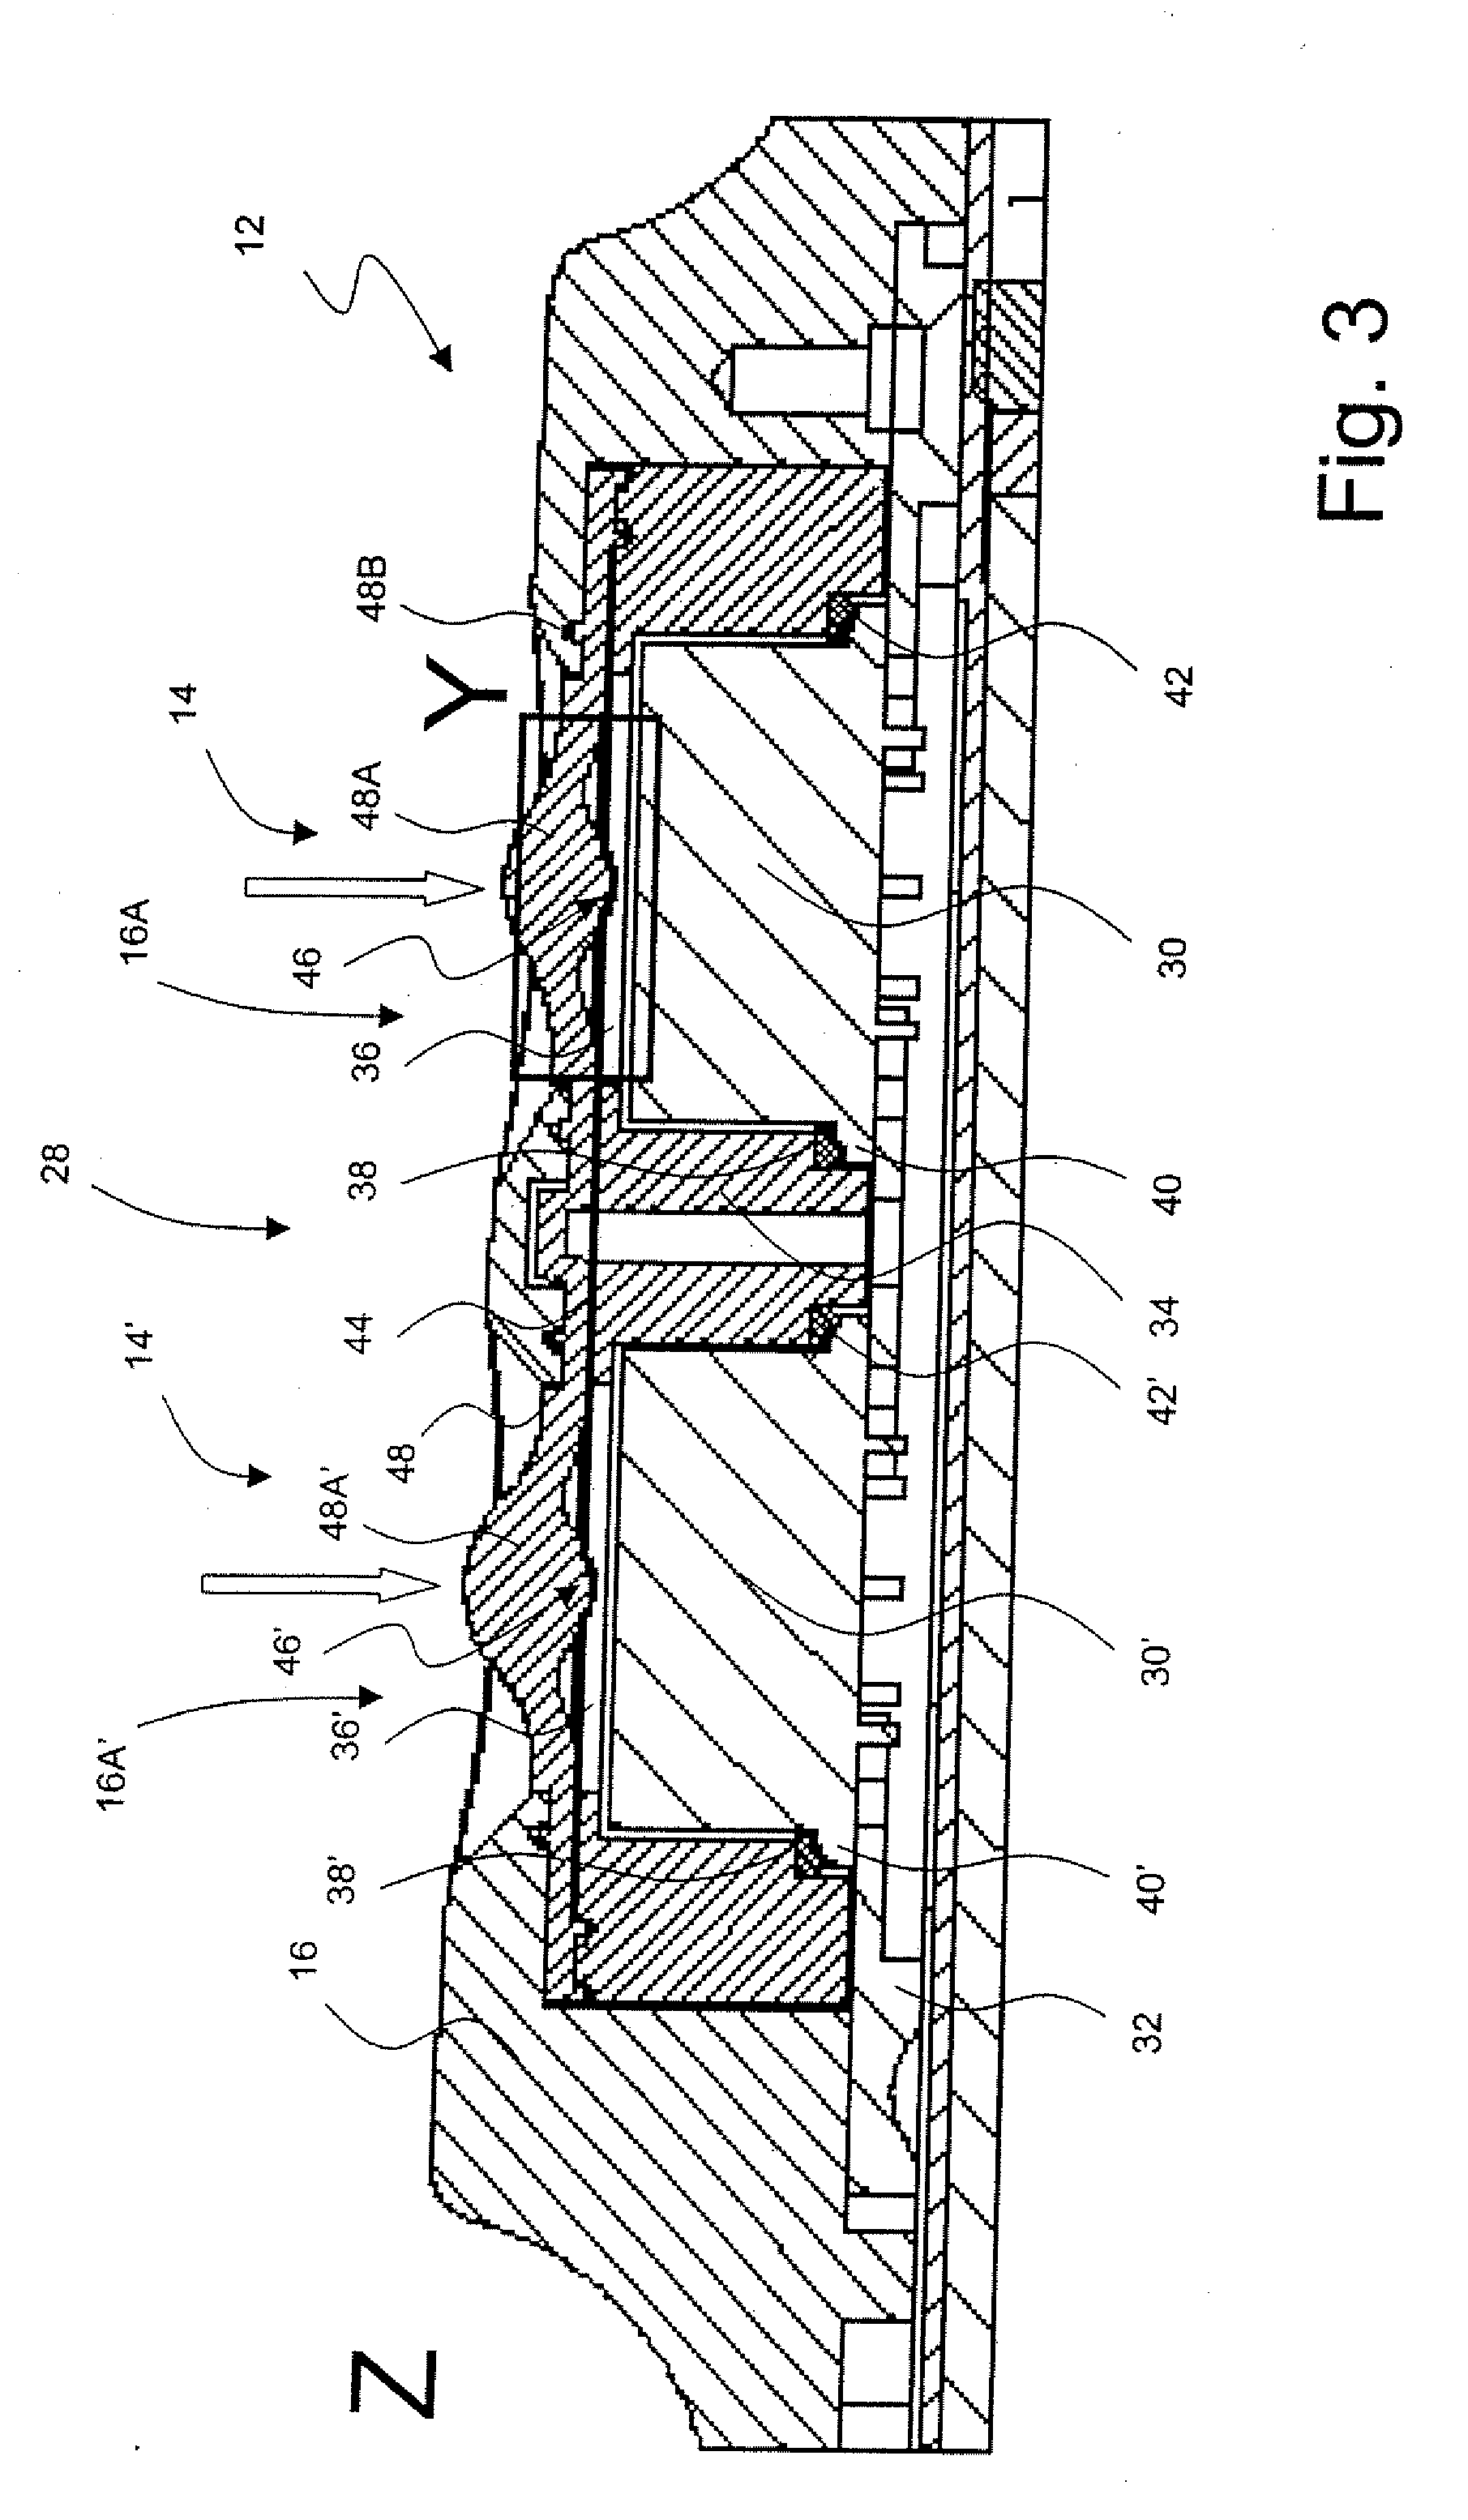 Method for operating a surgical power tool